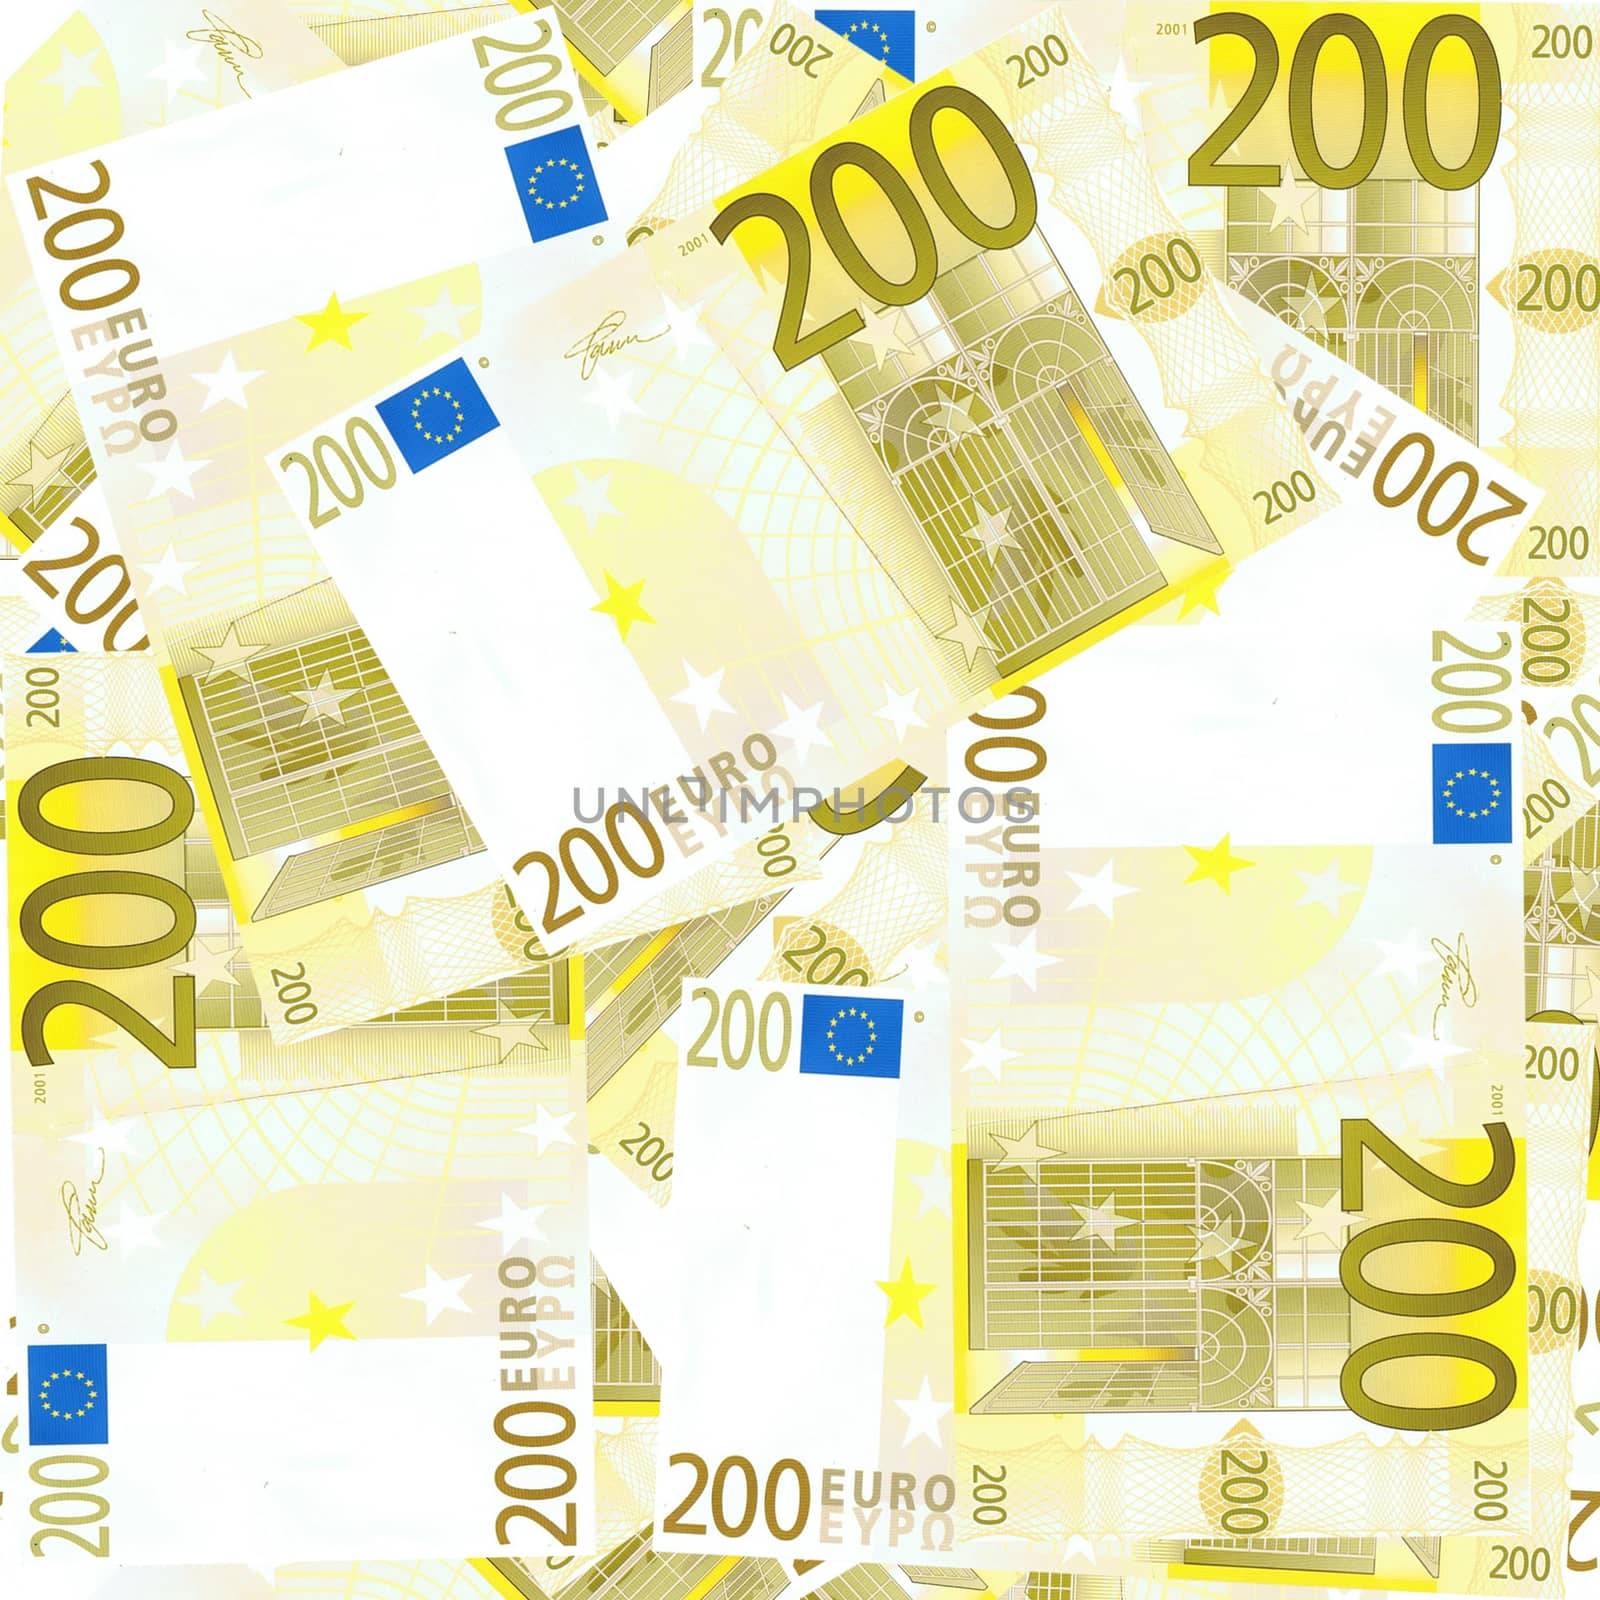 200 Euro Banknotes overlaps each others